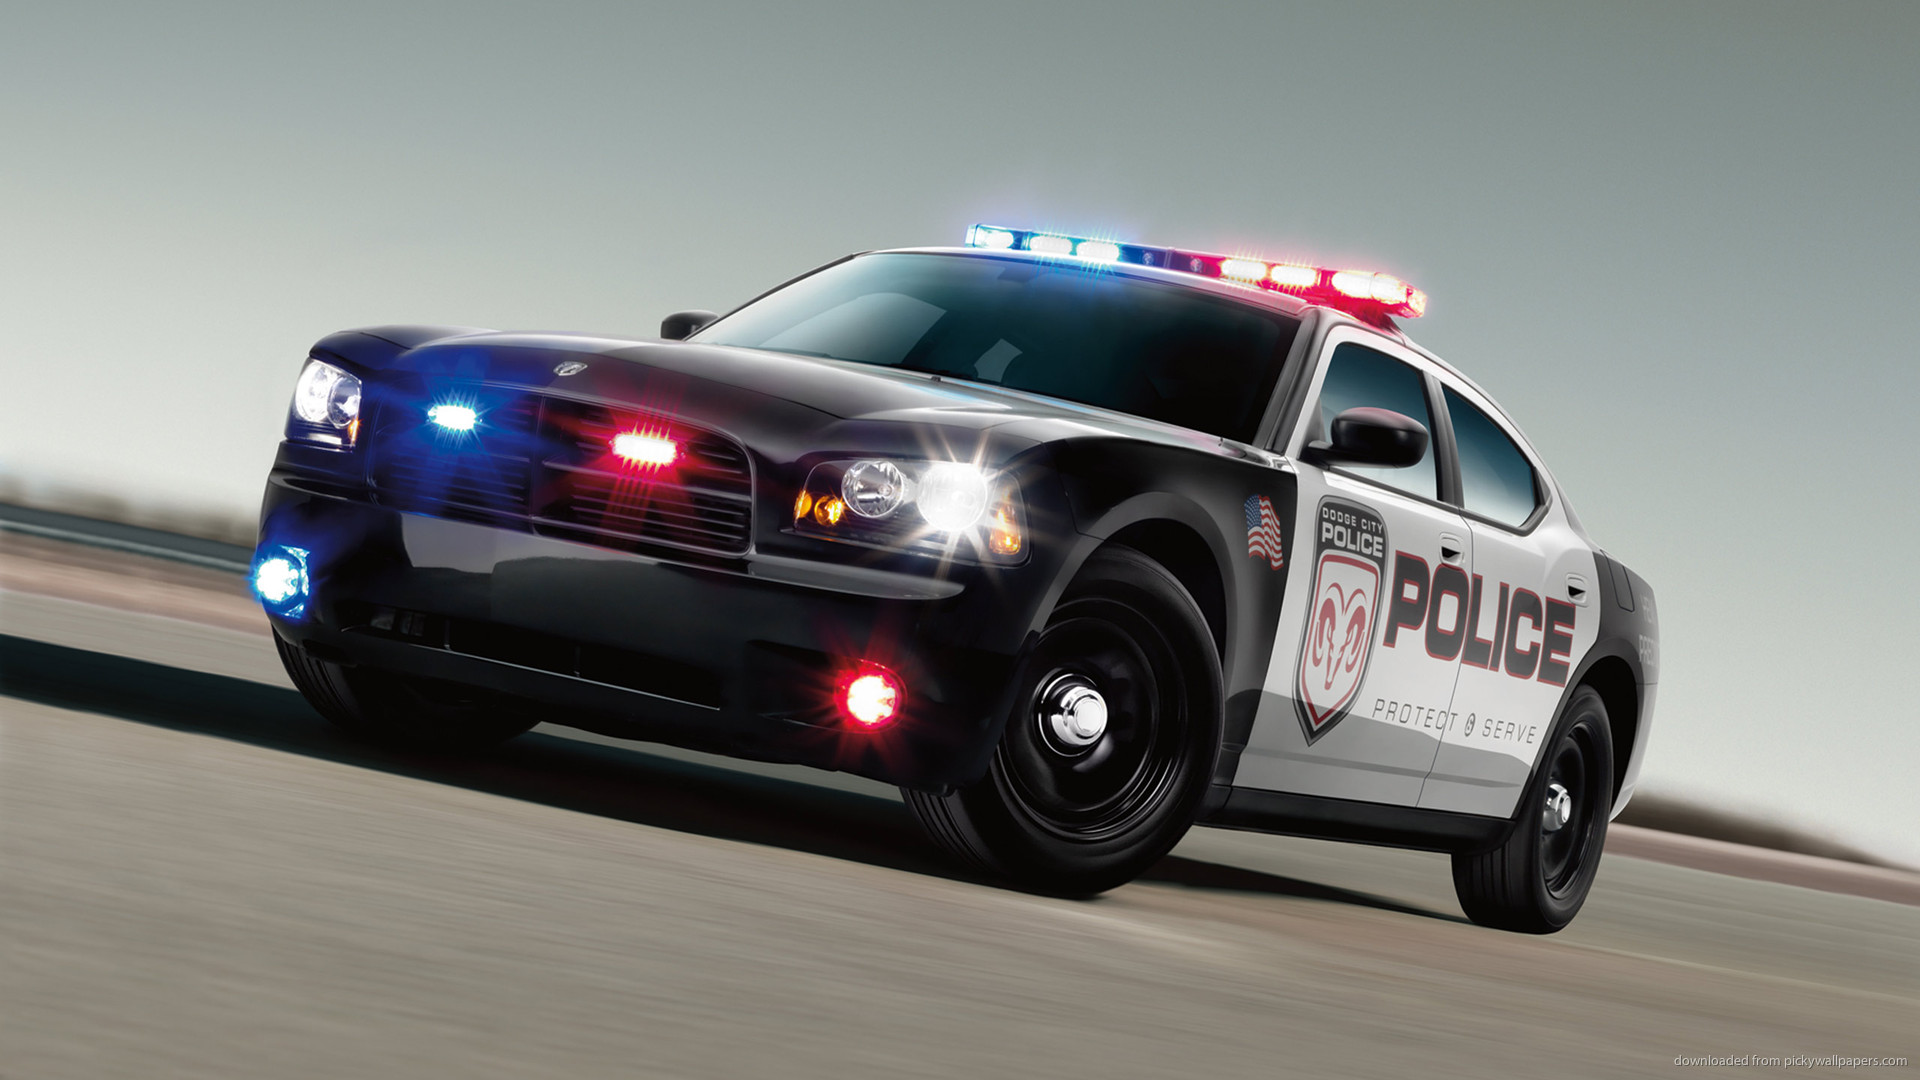 Dodge Charger Police Car wallpaper   691464